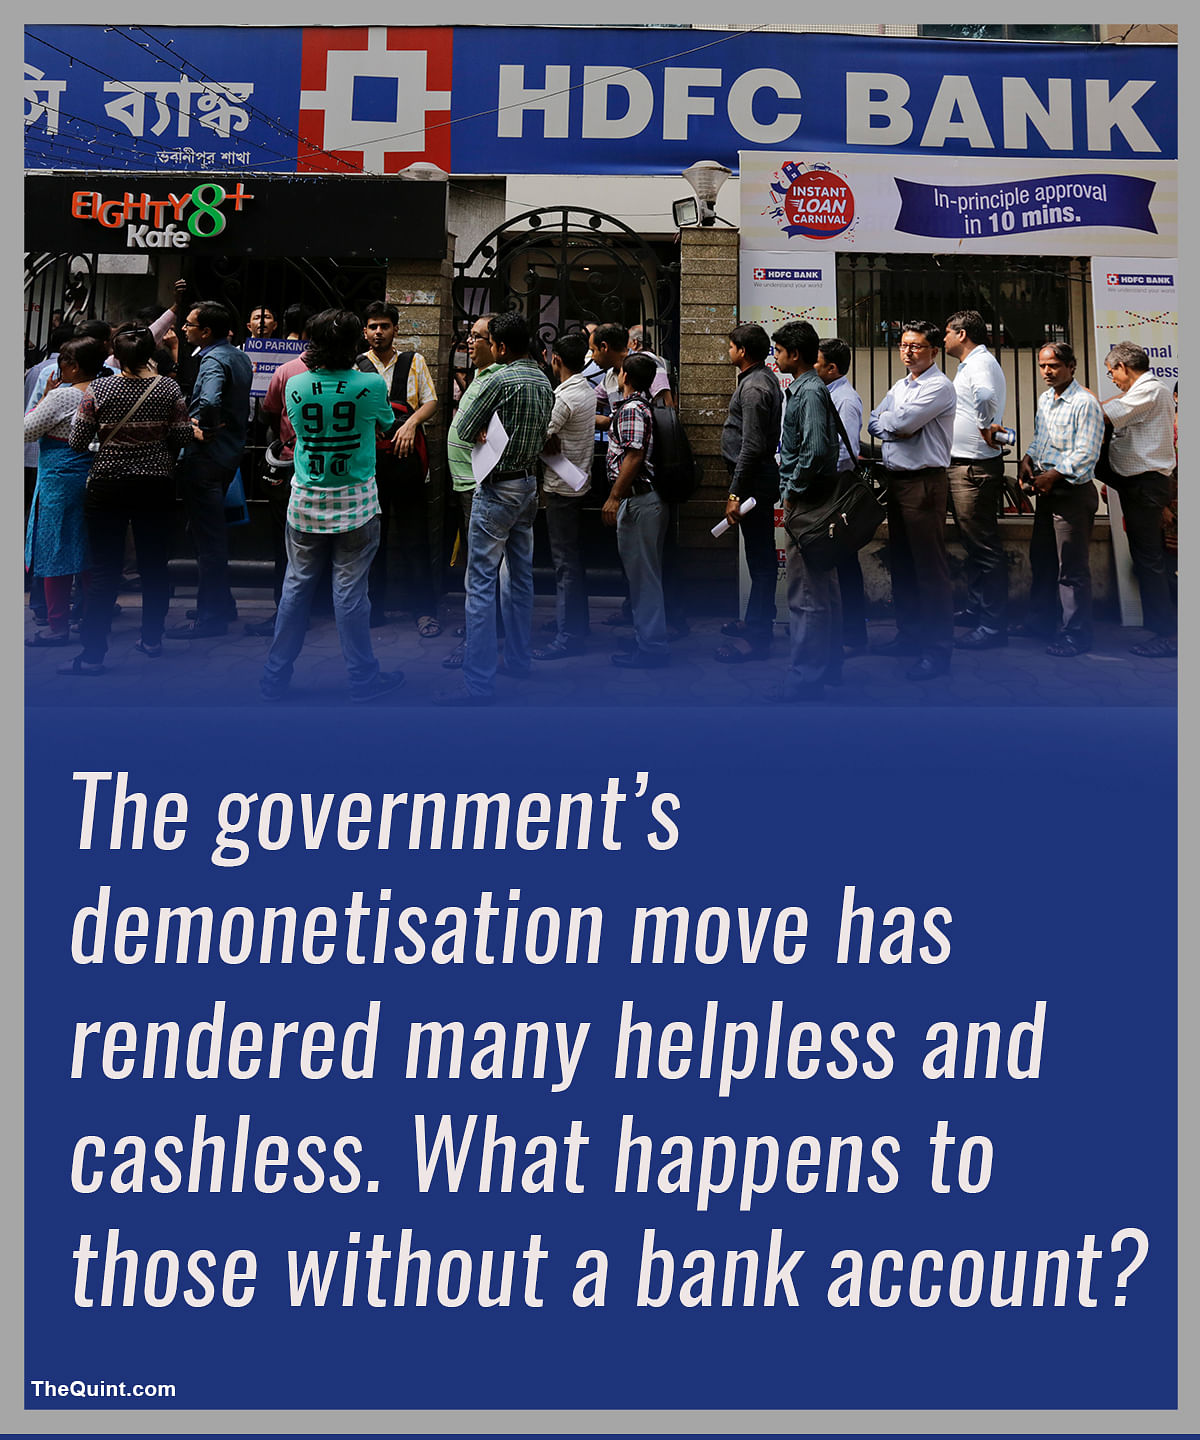 Can the government roll out a policy that does not provide for all those who do not have bank accounts?